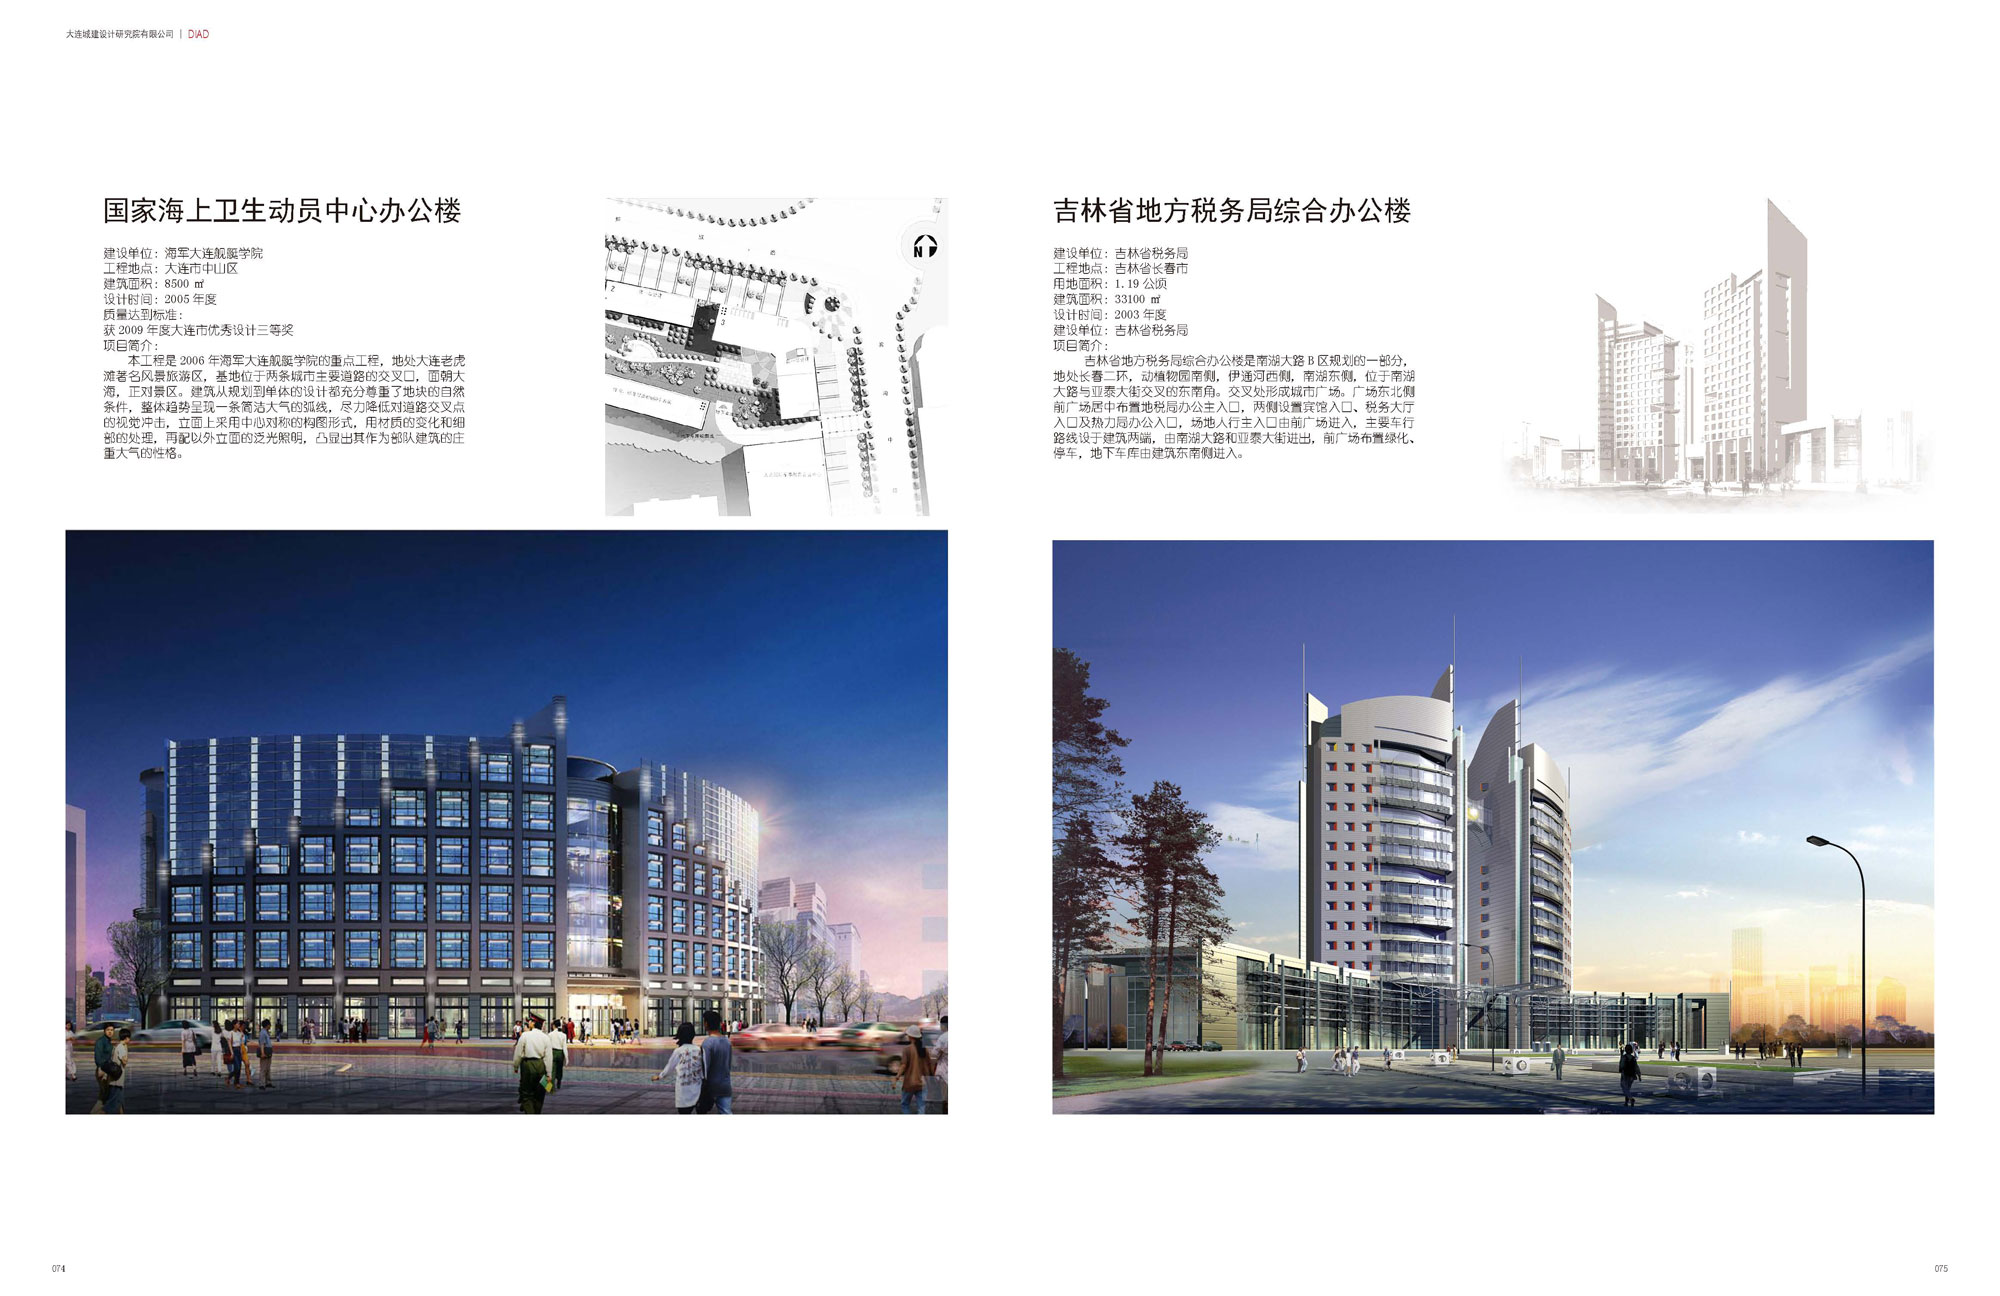 National Marine Medical Officer Central Office Building & Jinlin Province Local Taxation Bureau Compl